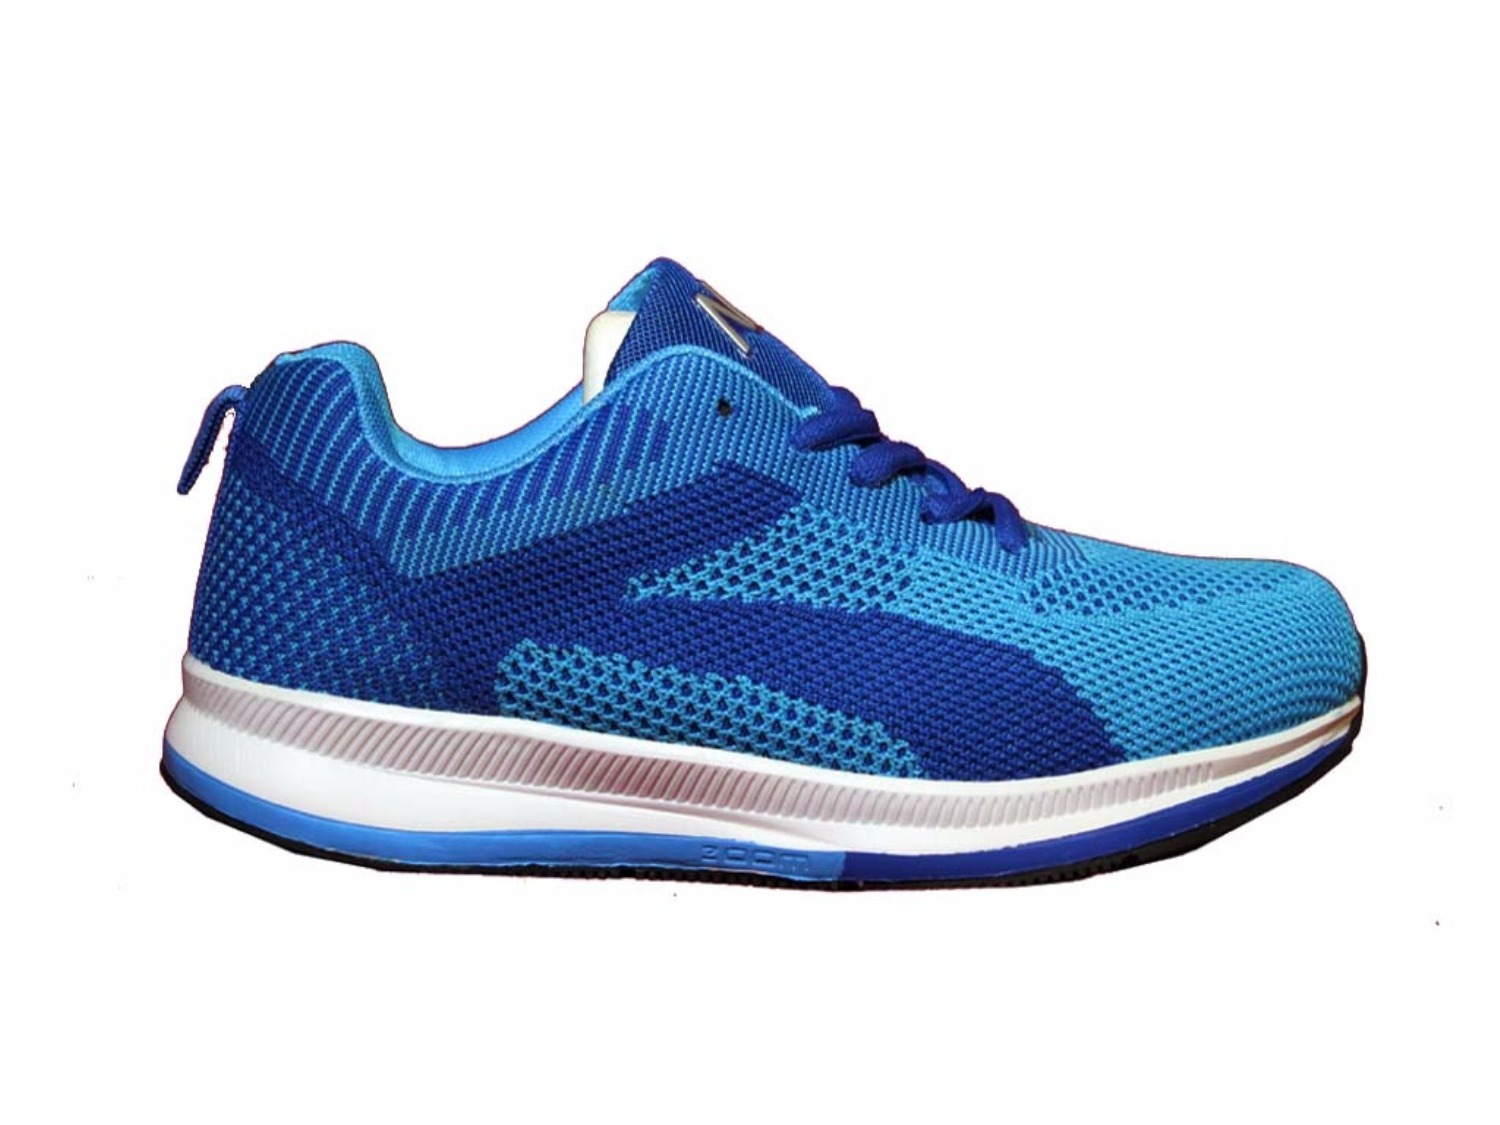 Buy MAX AIR SPORTS RUNNING SHOES FOR WOMEN'S Online @ ₹1599 from ShopClues